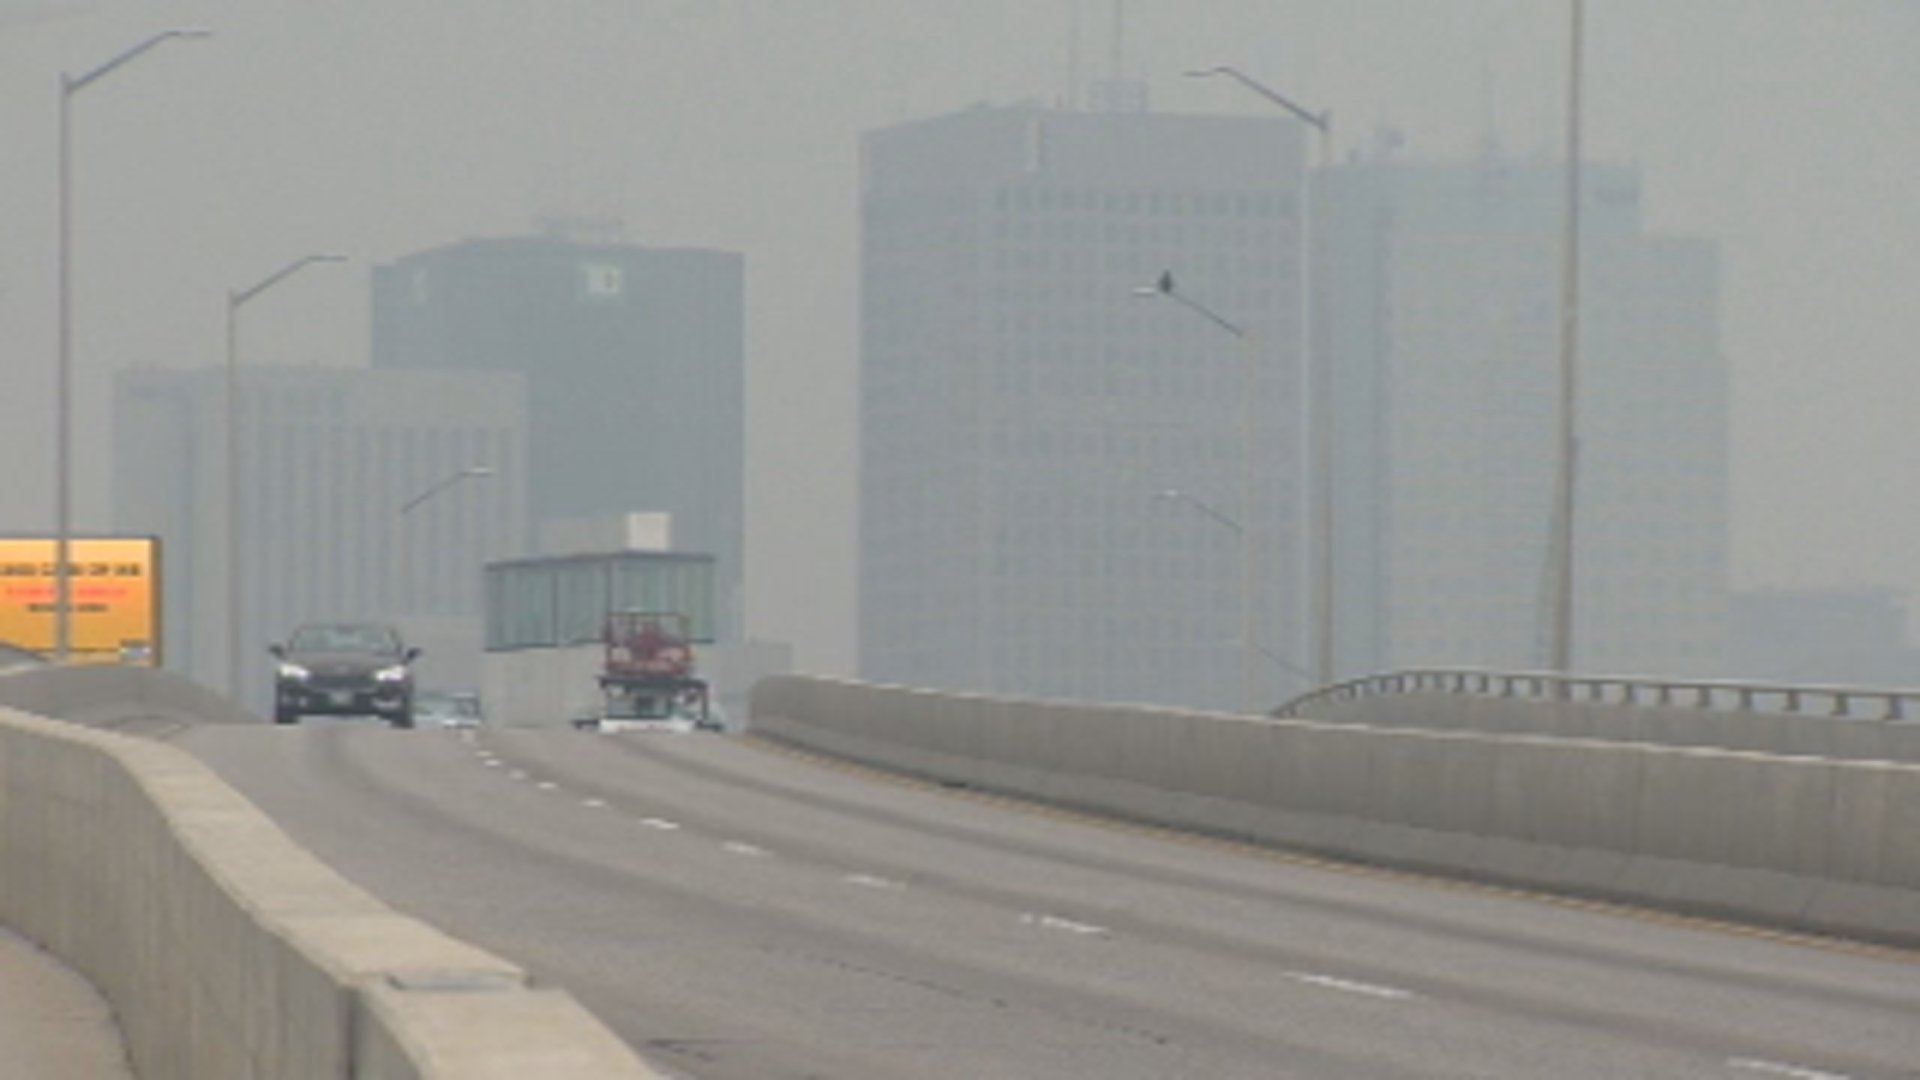 Downtown Winnipeg buildings are partially blurred by smoke in the air. A car crosses a bridge in the foreground.